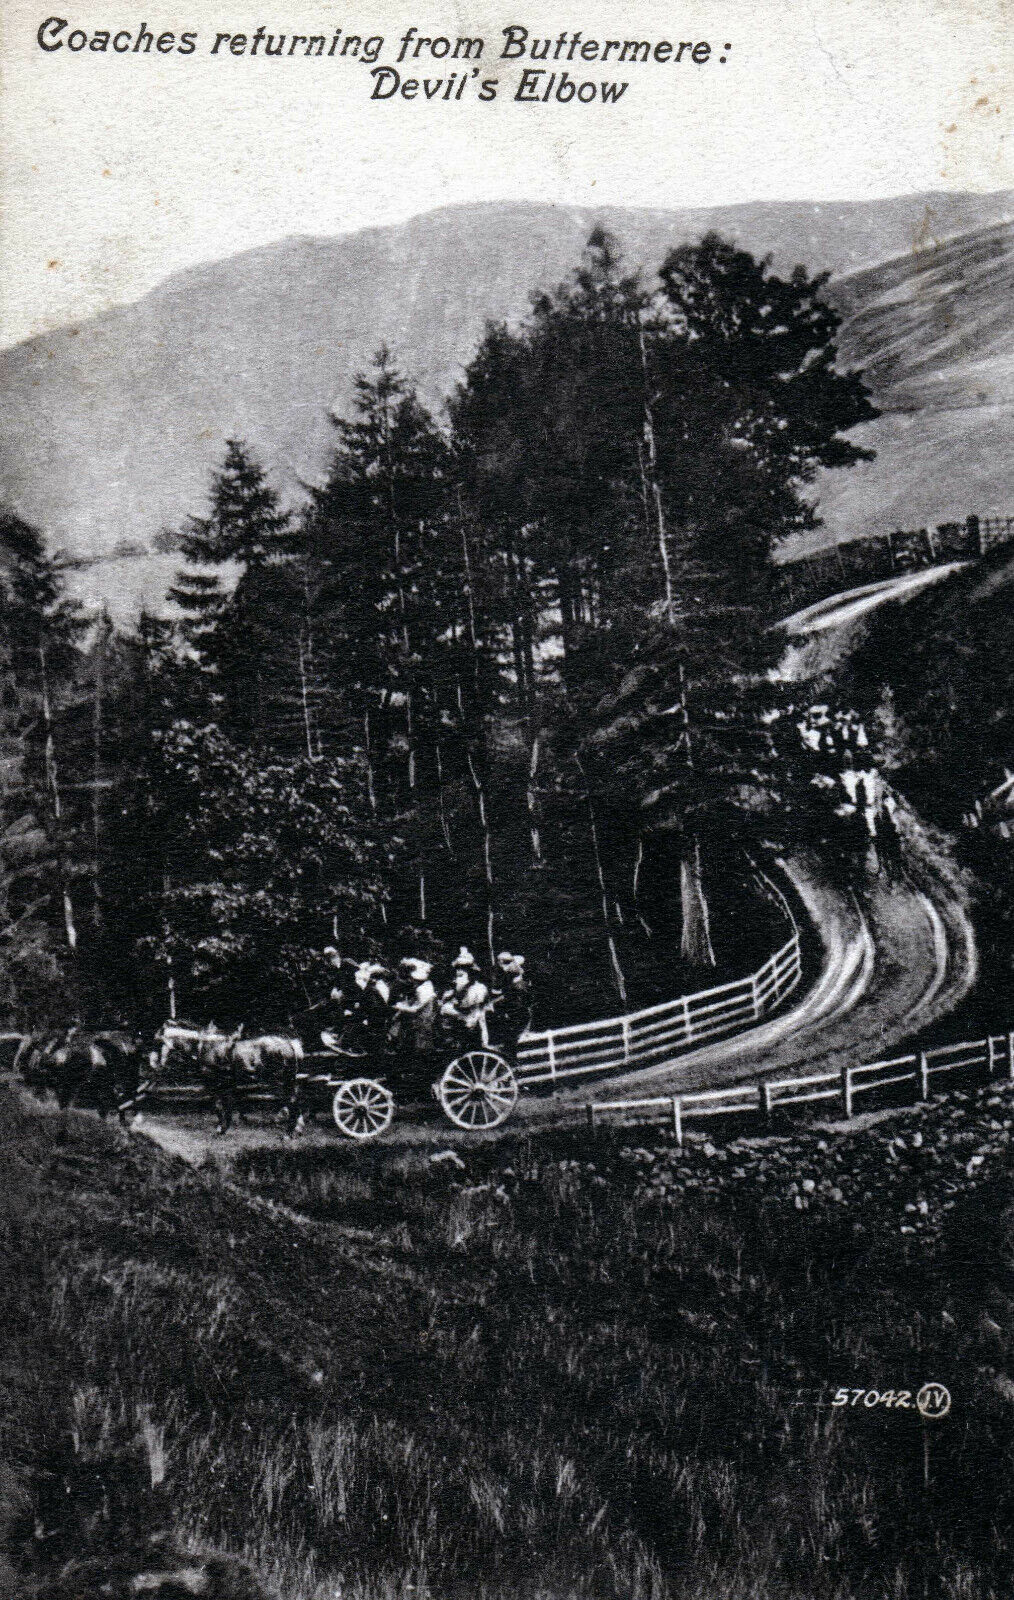 House Clearance - COACHES RETURNING FROM BUTTERMERE: DEVIL'S ELBOW, CUMBRIA early 1900's(?)